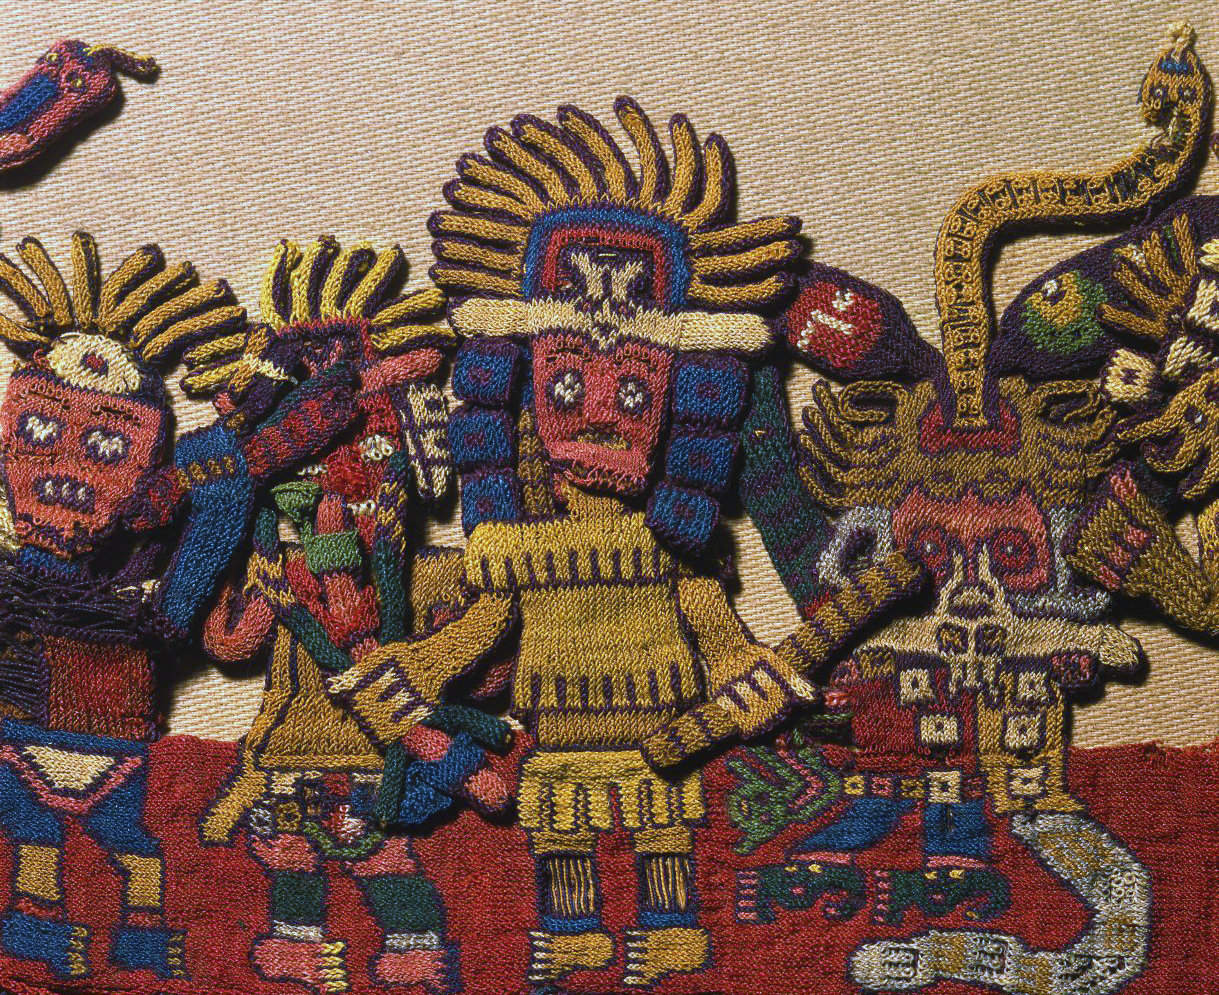 Five interesting facts about textiles in Peru